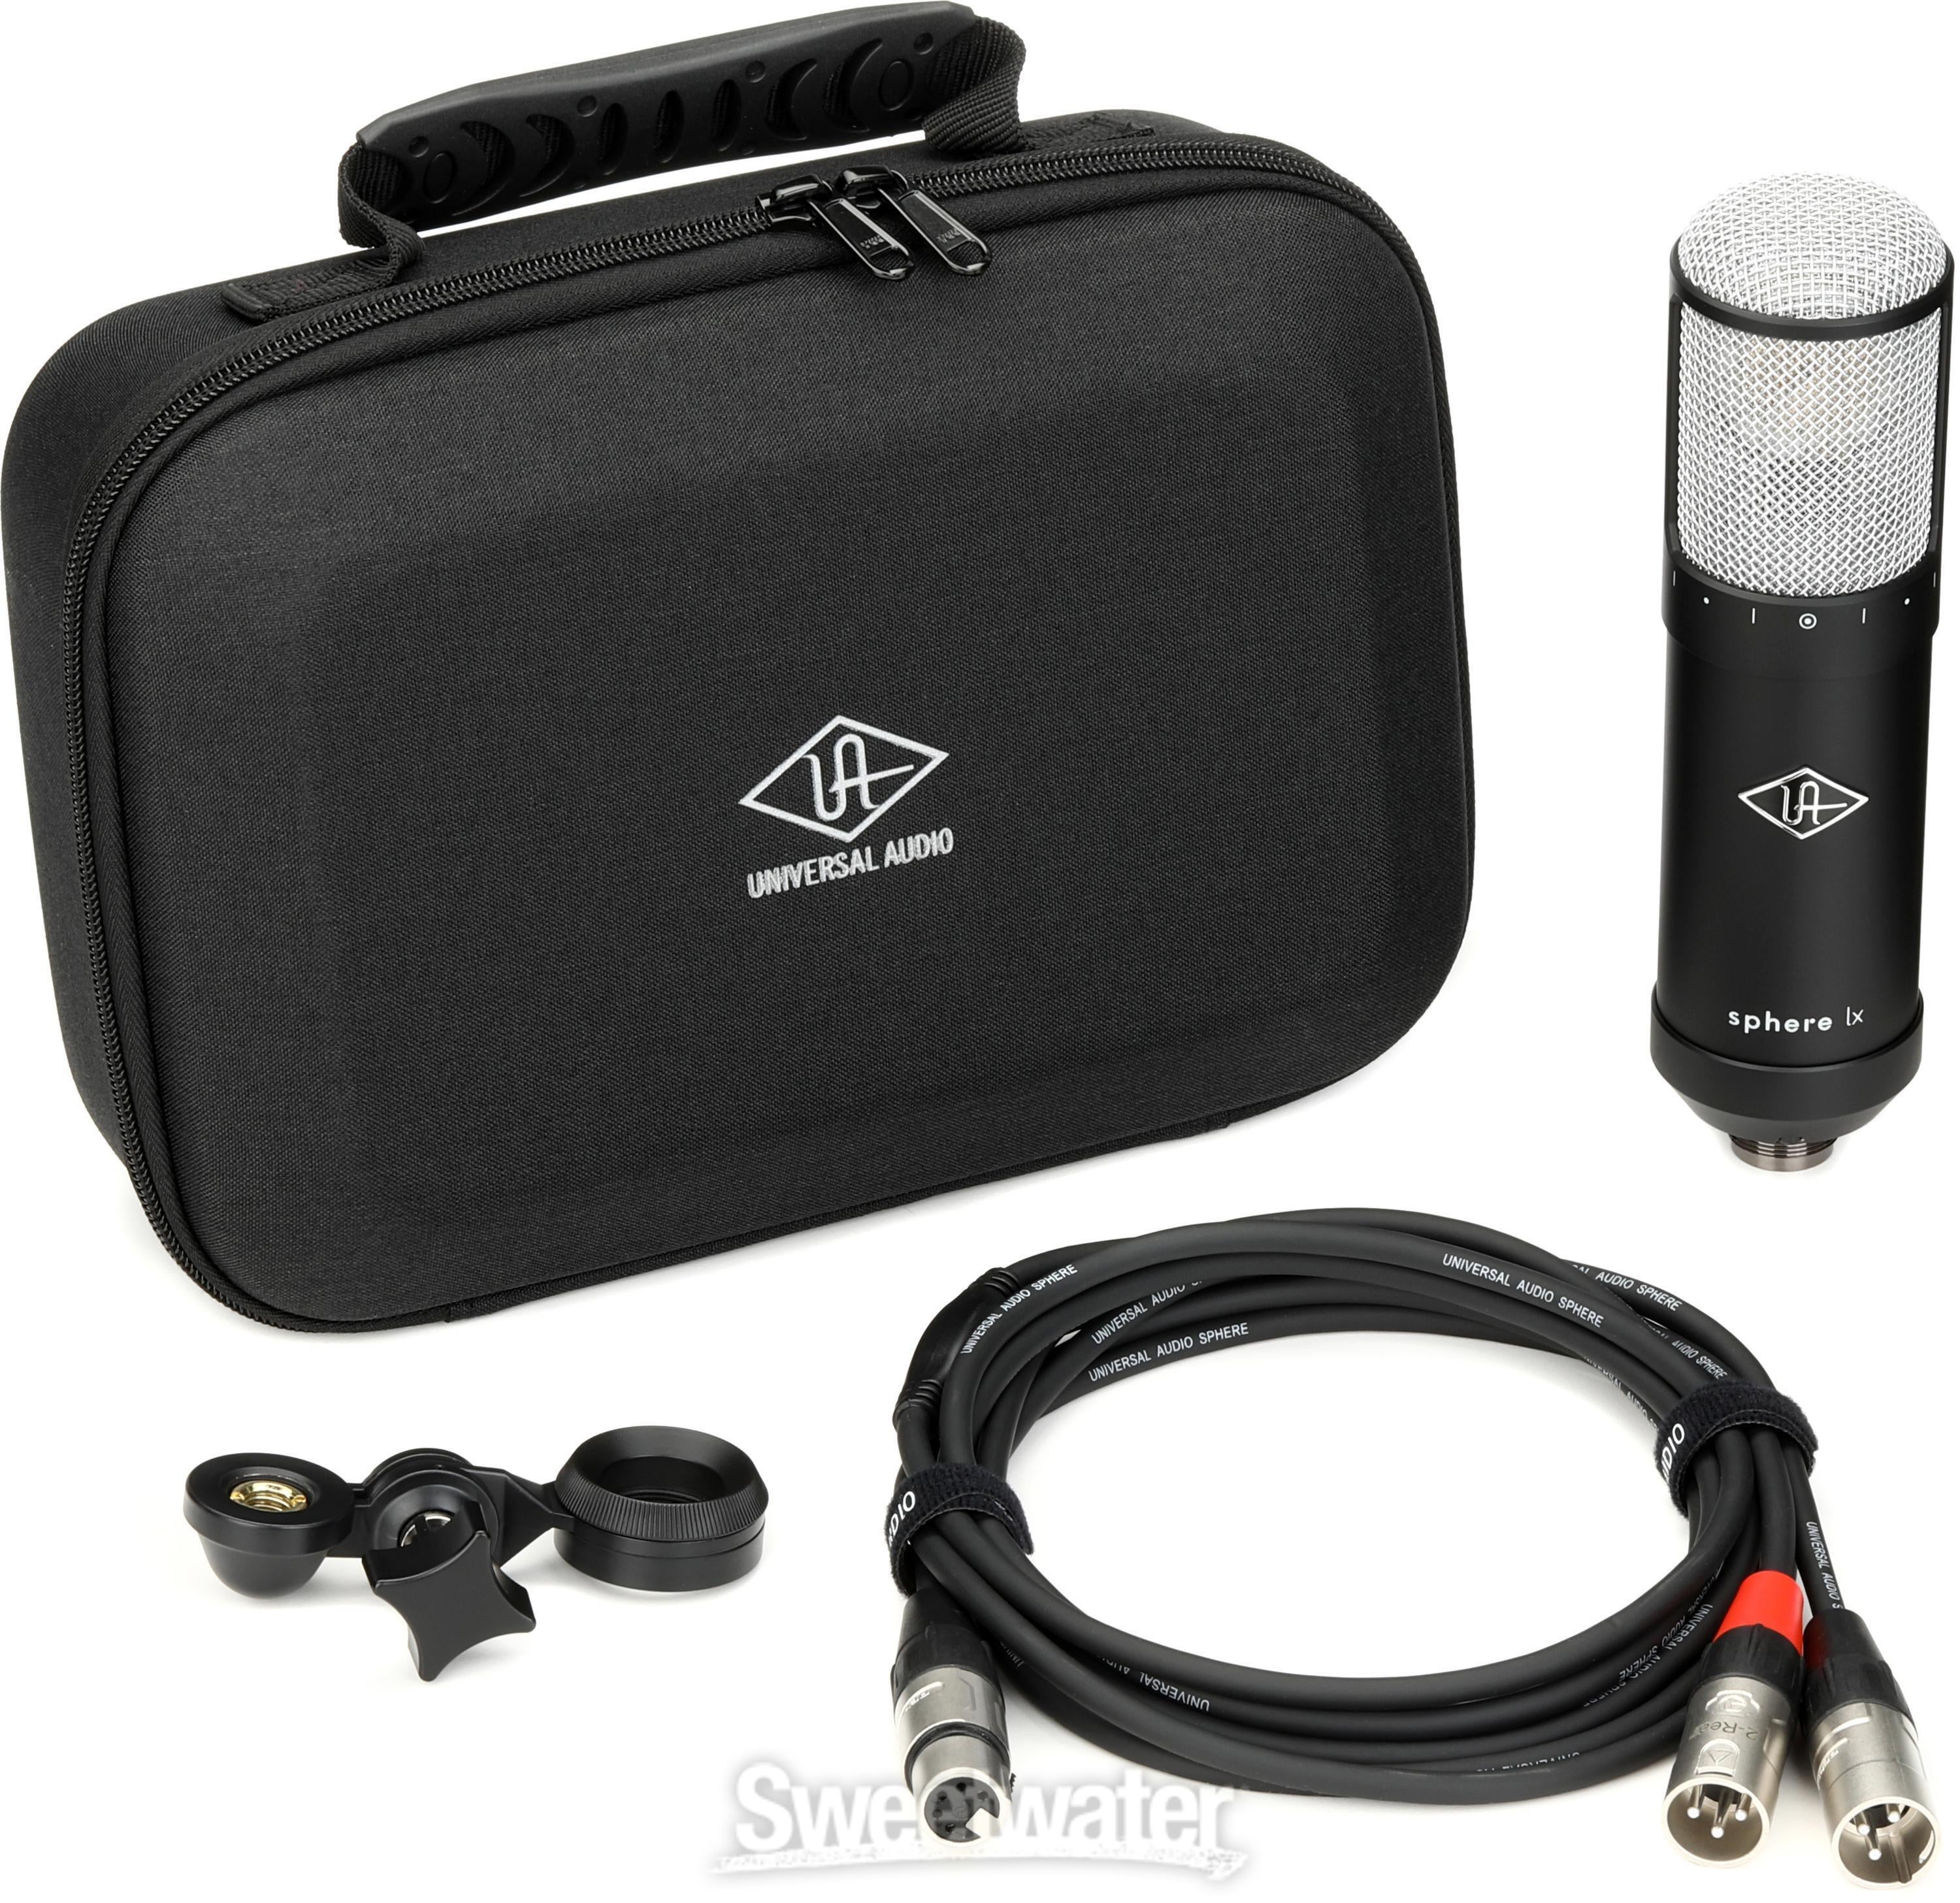 Universal Audio Sphere LX Modeling Microphone System | Sweetwater